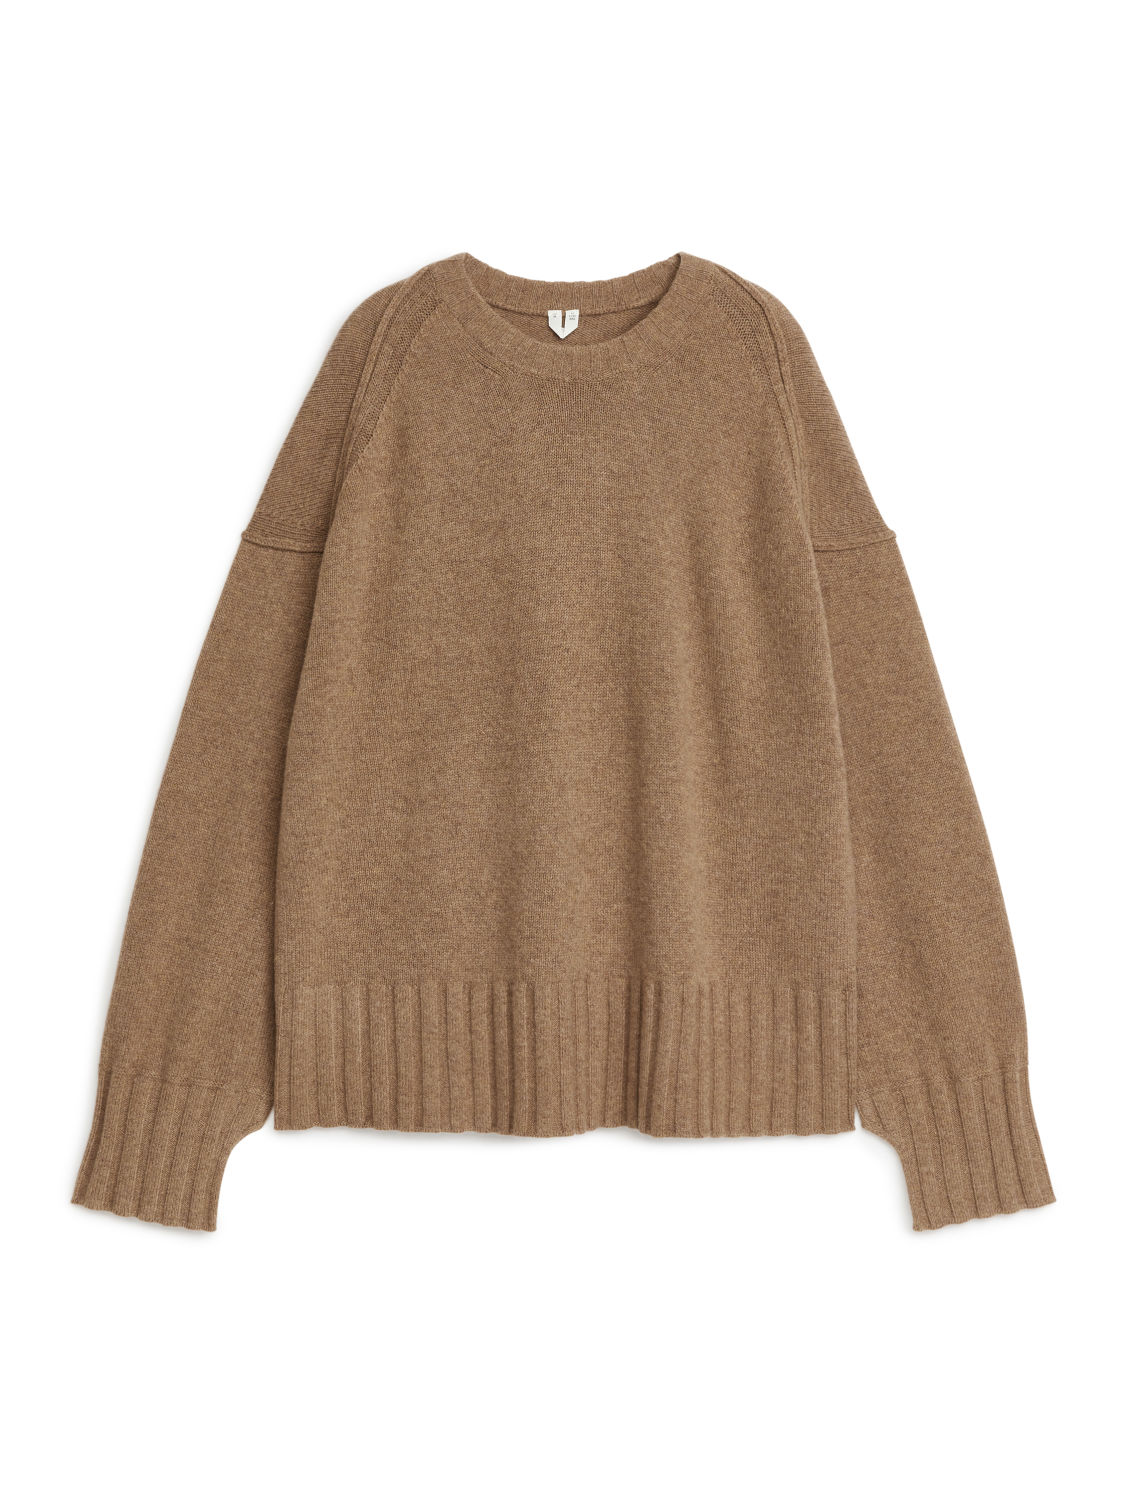 The Arket Cable-Knit Jumper Is Finally Back in Stock | Who What Wear UK